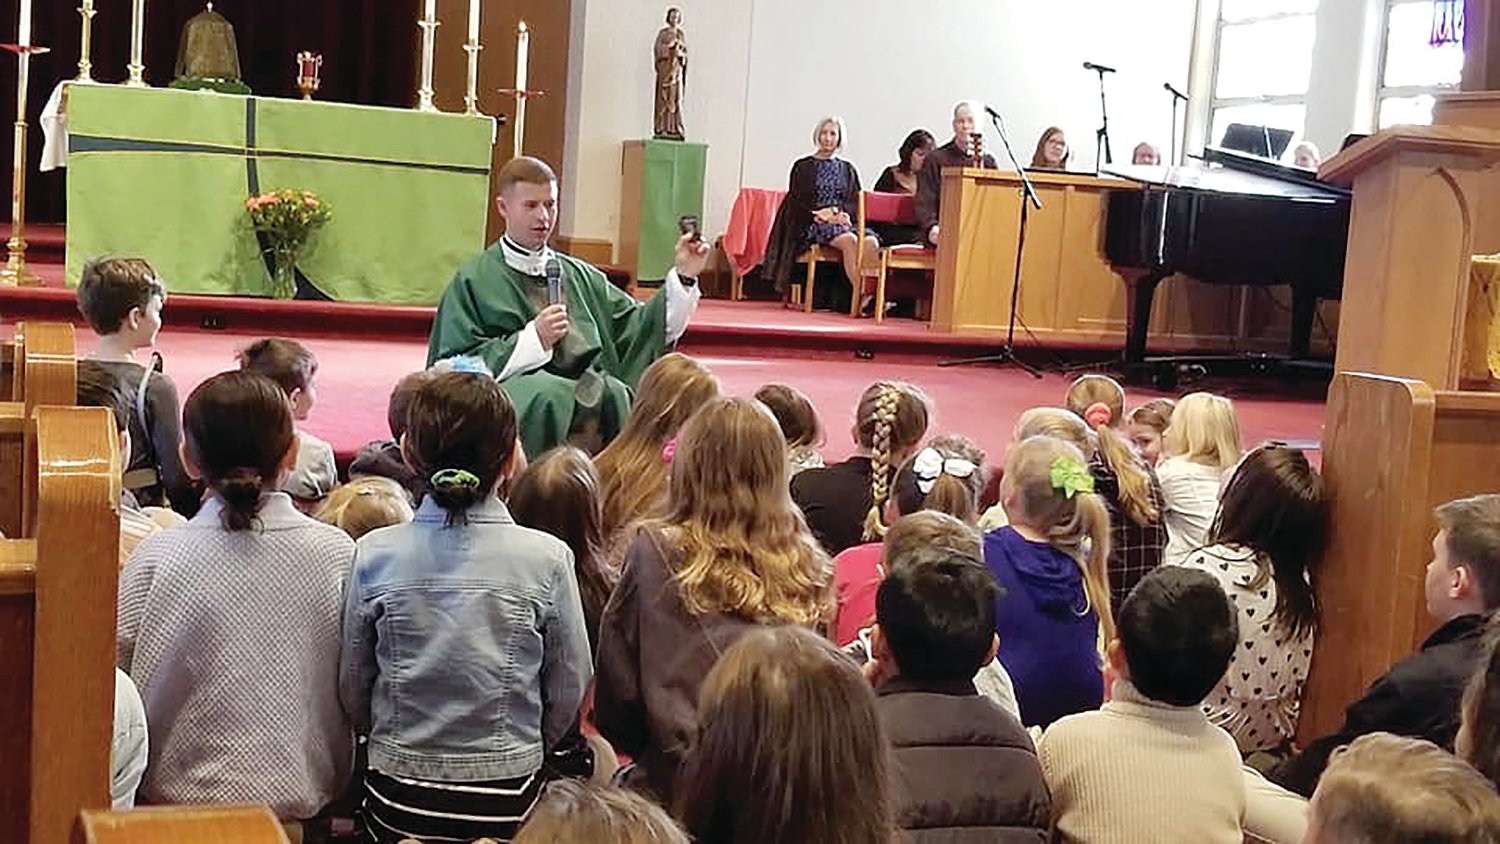 He speaks with young children as they prepare to receive the sacraments.